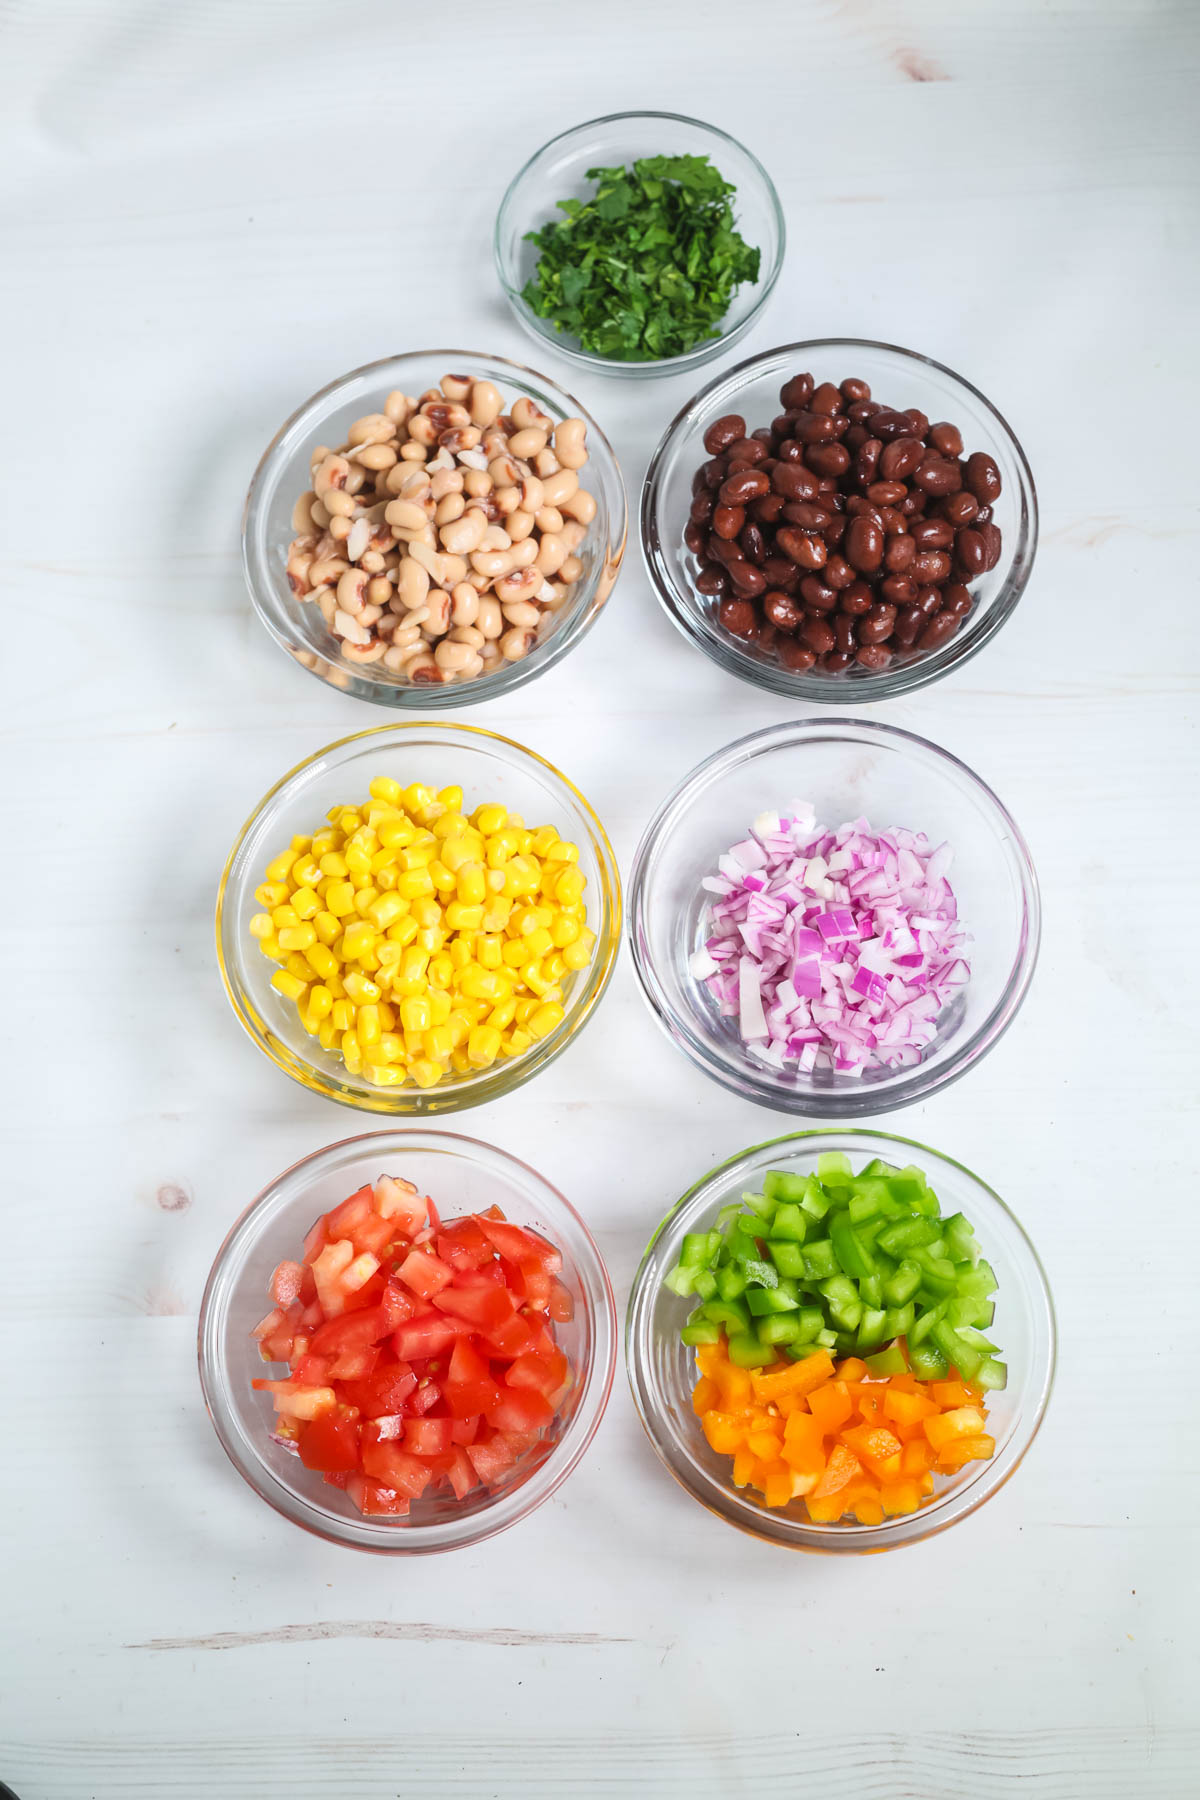 Top-down view of various ingredients in bowls of black and white beans, corn, chopped red onions, tomatoes, and bell peppers, on a white surface.